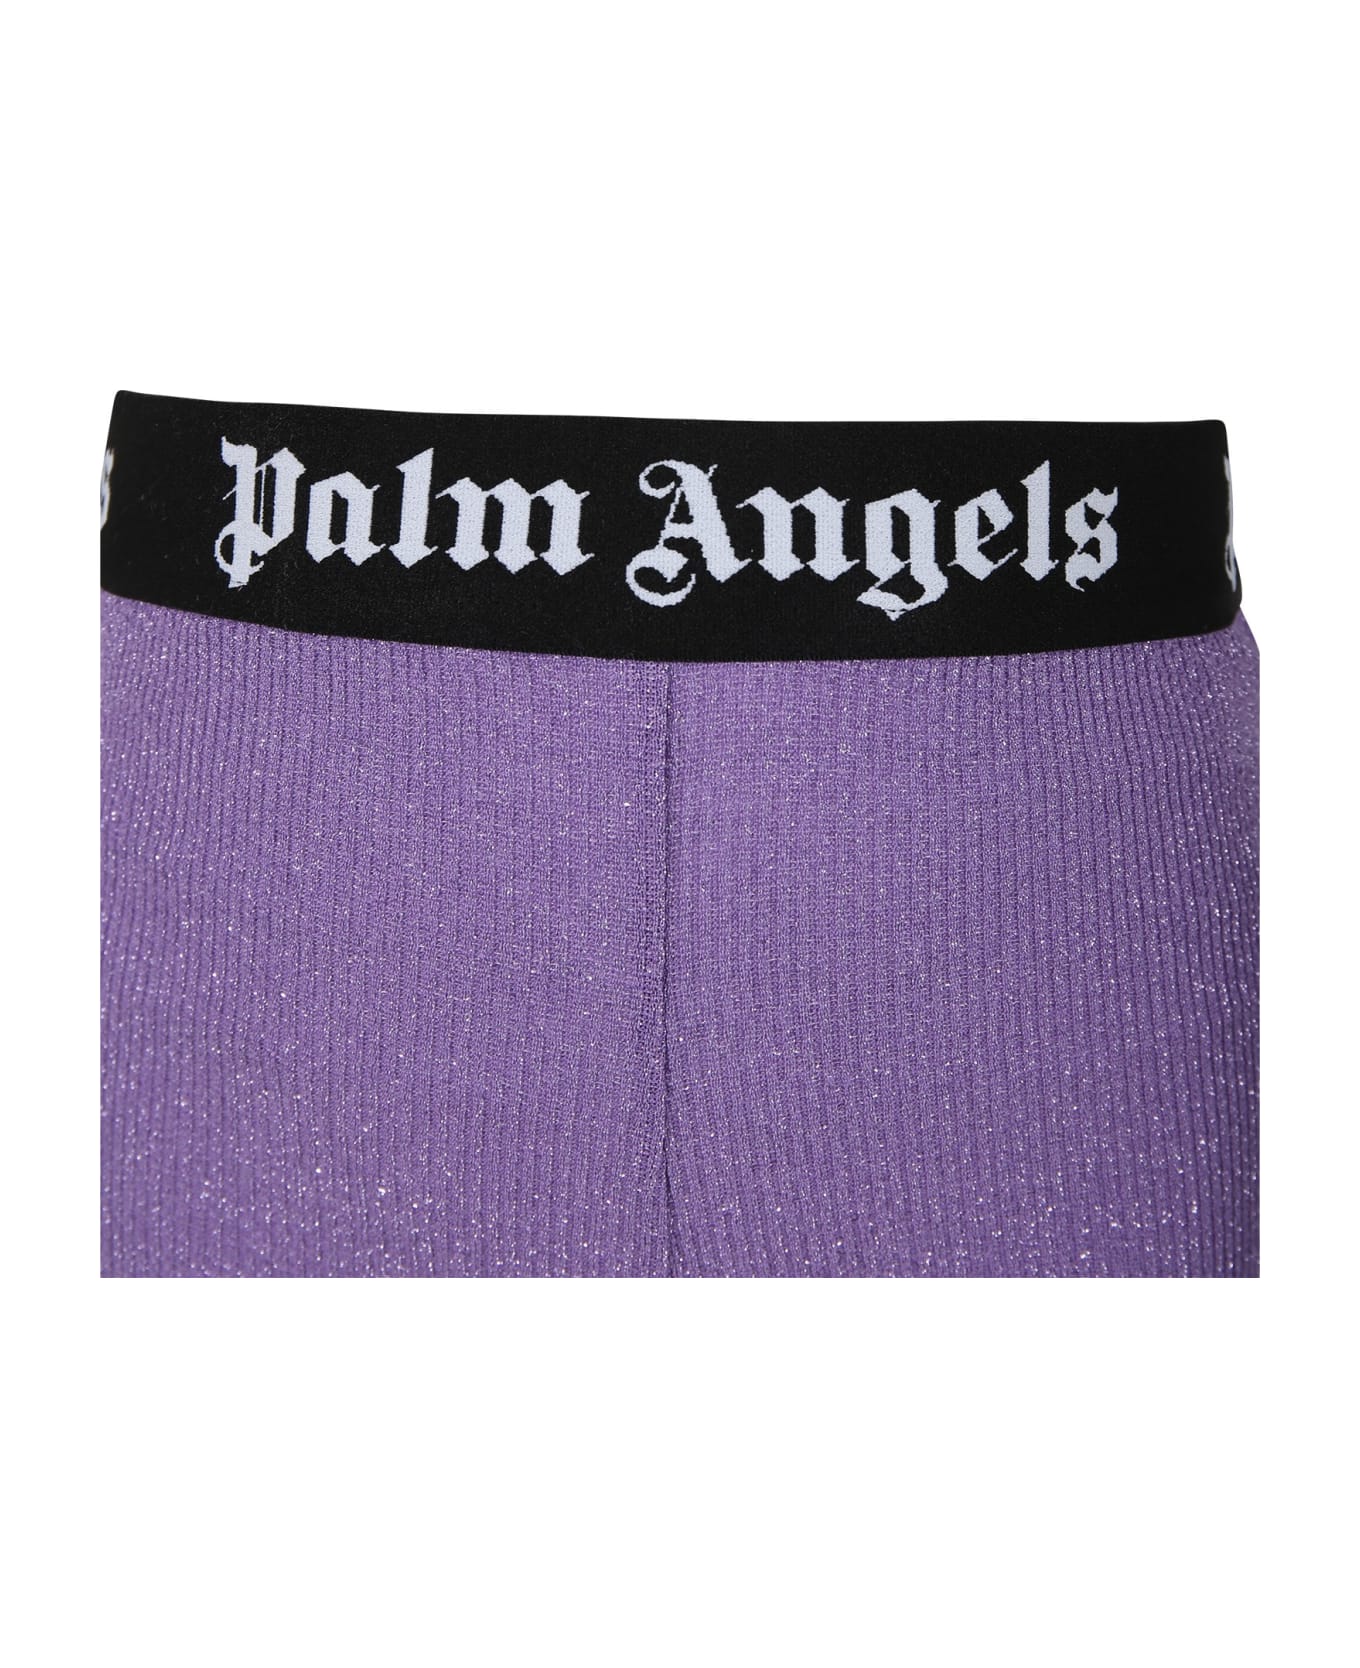 Palm Angels Purple Leggings For Girl With Logo - Violet ボトムス